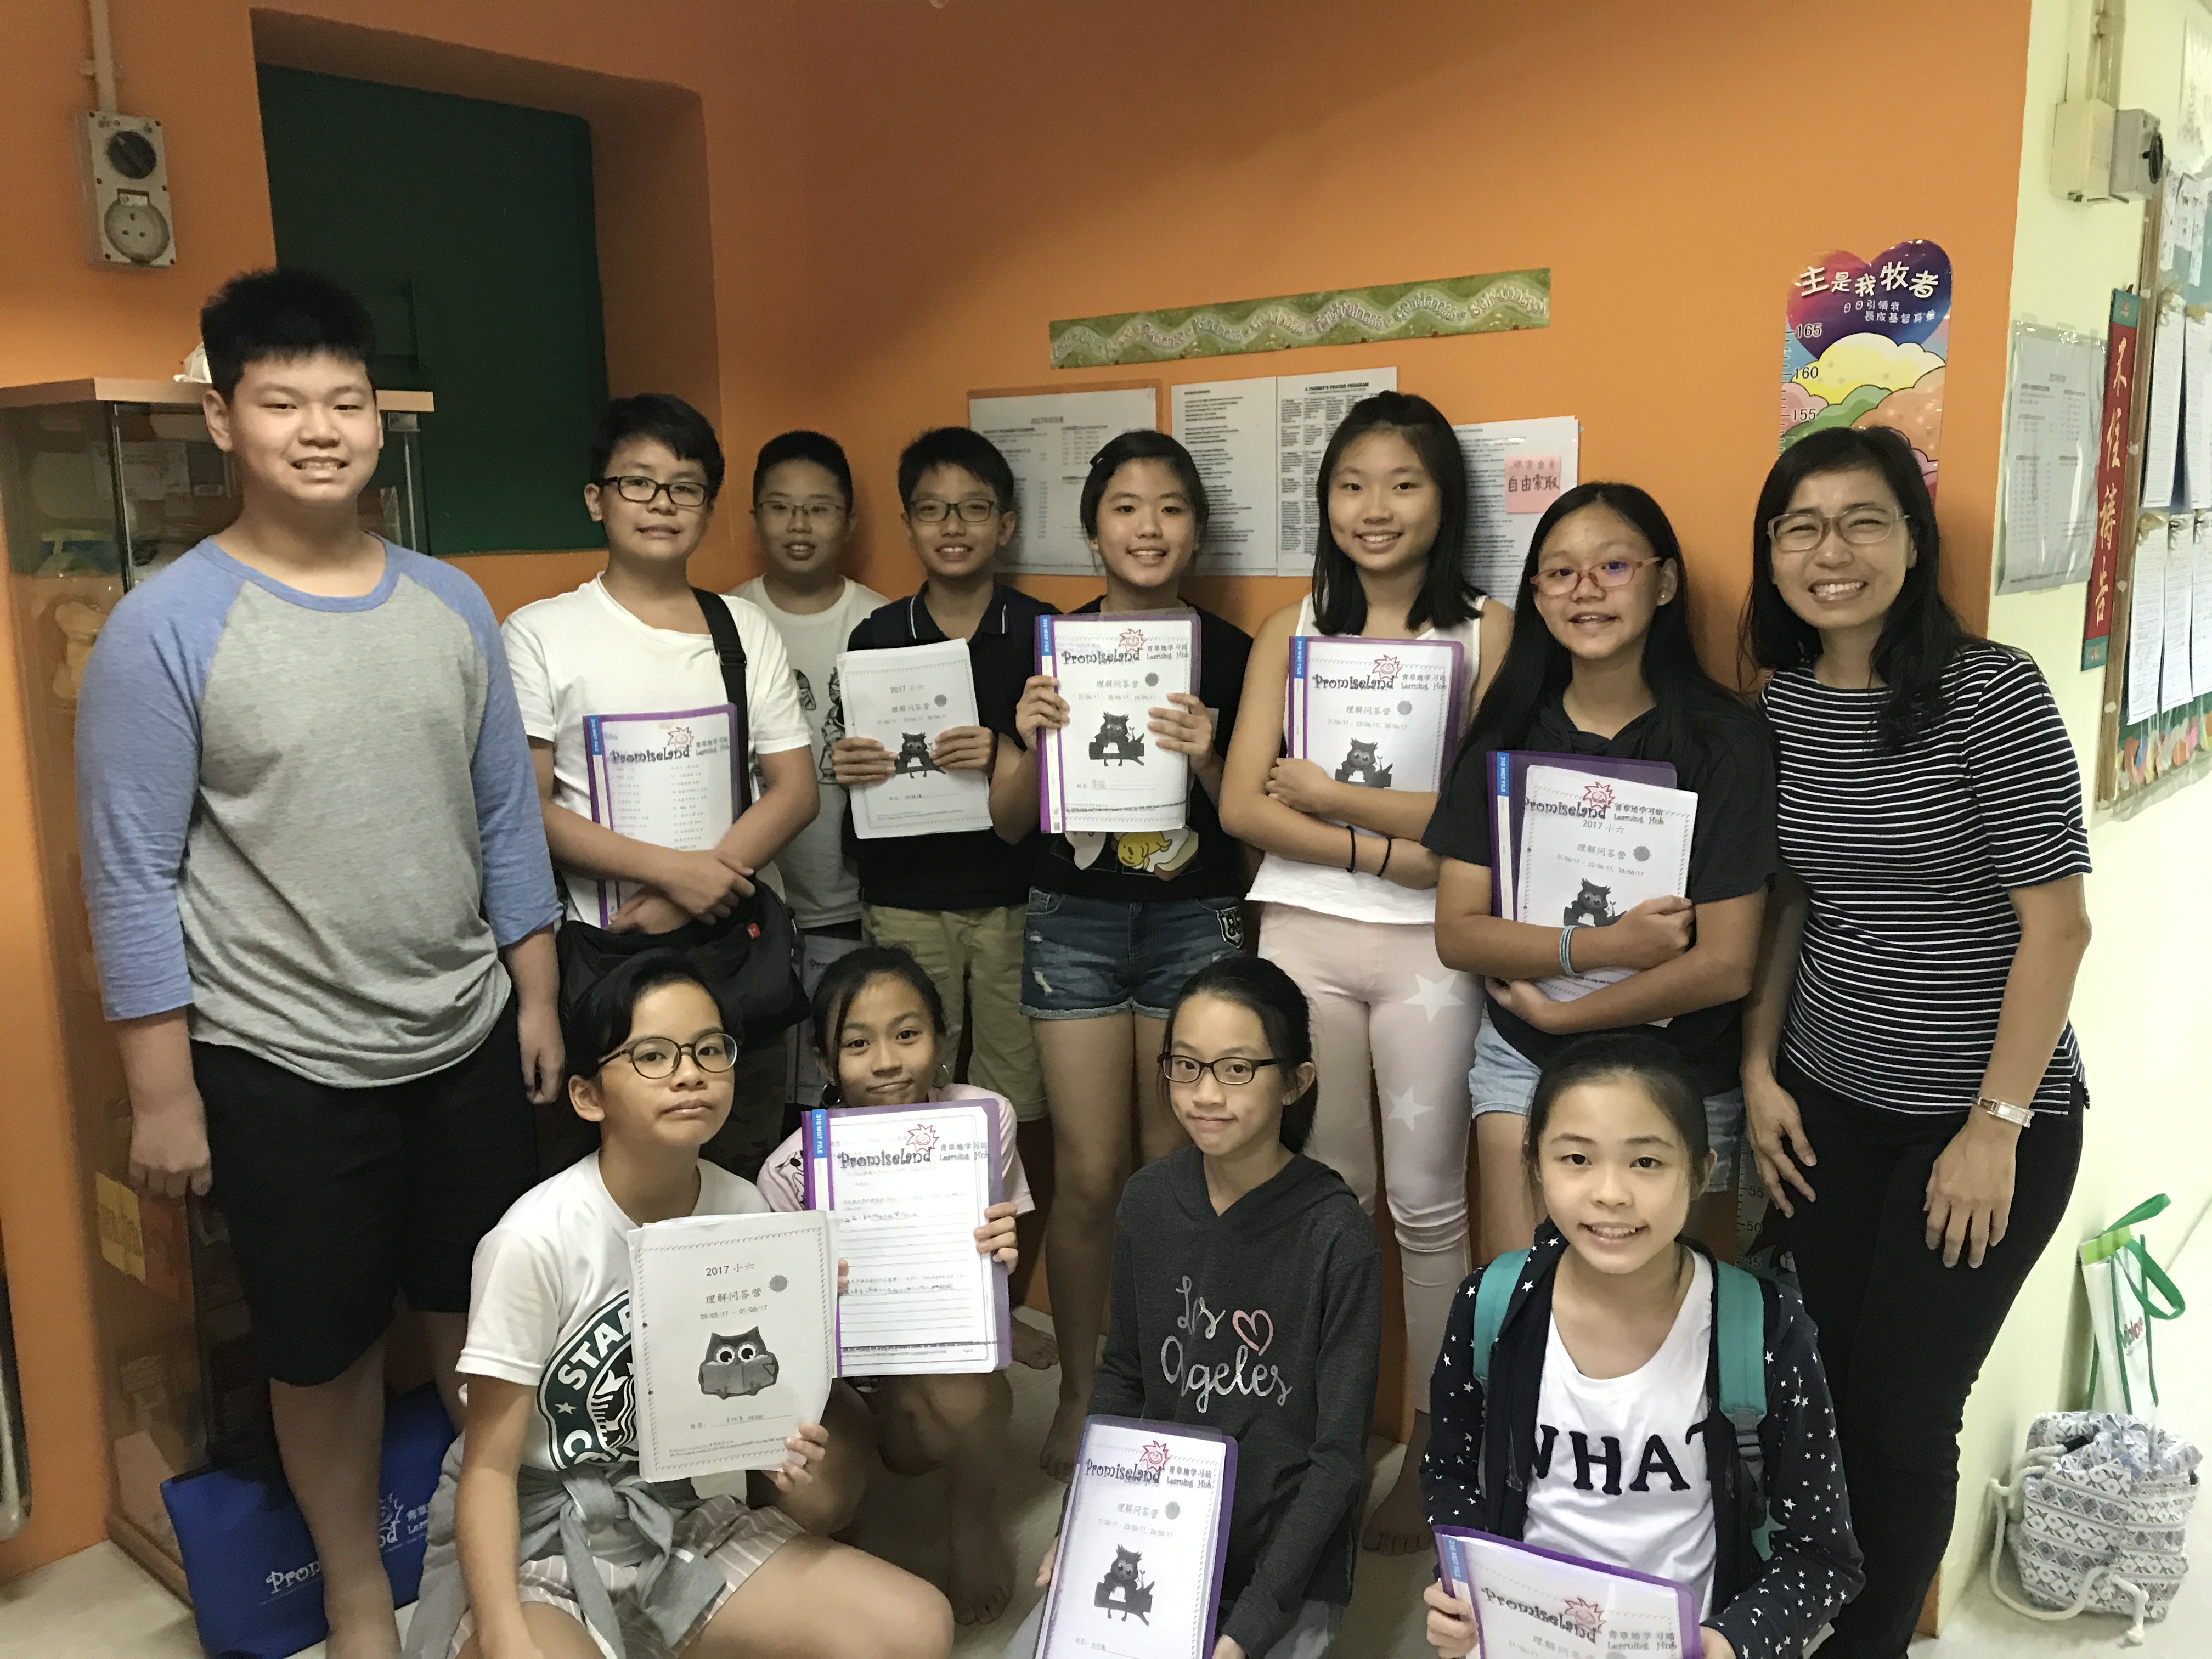 Promiseland Learning Hub about primary school psle students